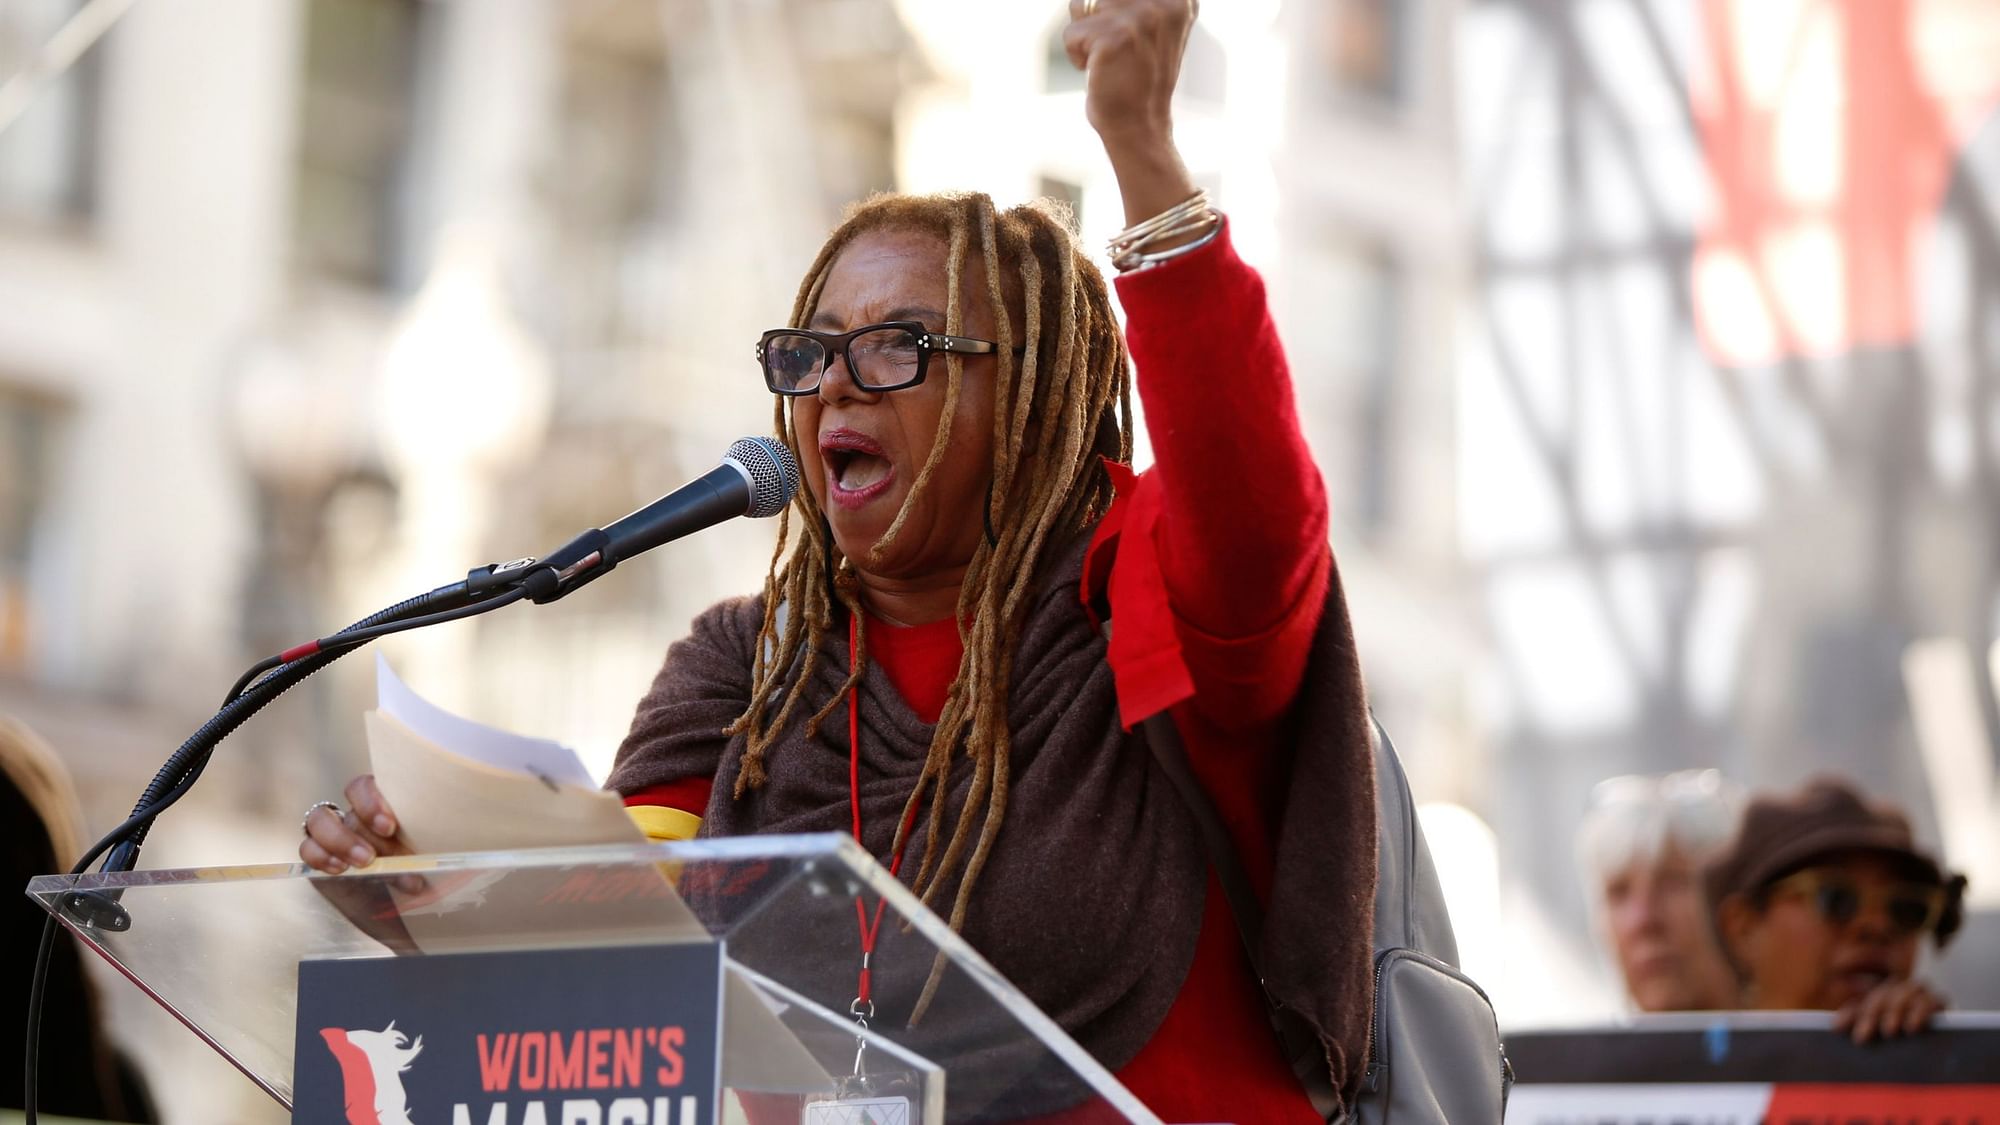 Activist Margaret Prescod, radio host and producer, speaks at Pershing Square during the 3rd Women’s March in Los Angeles.